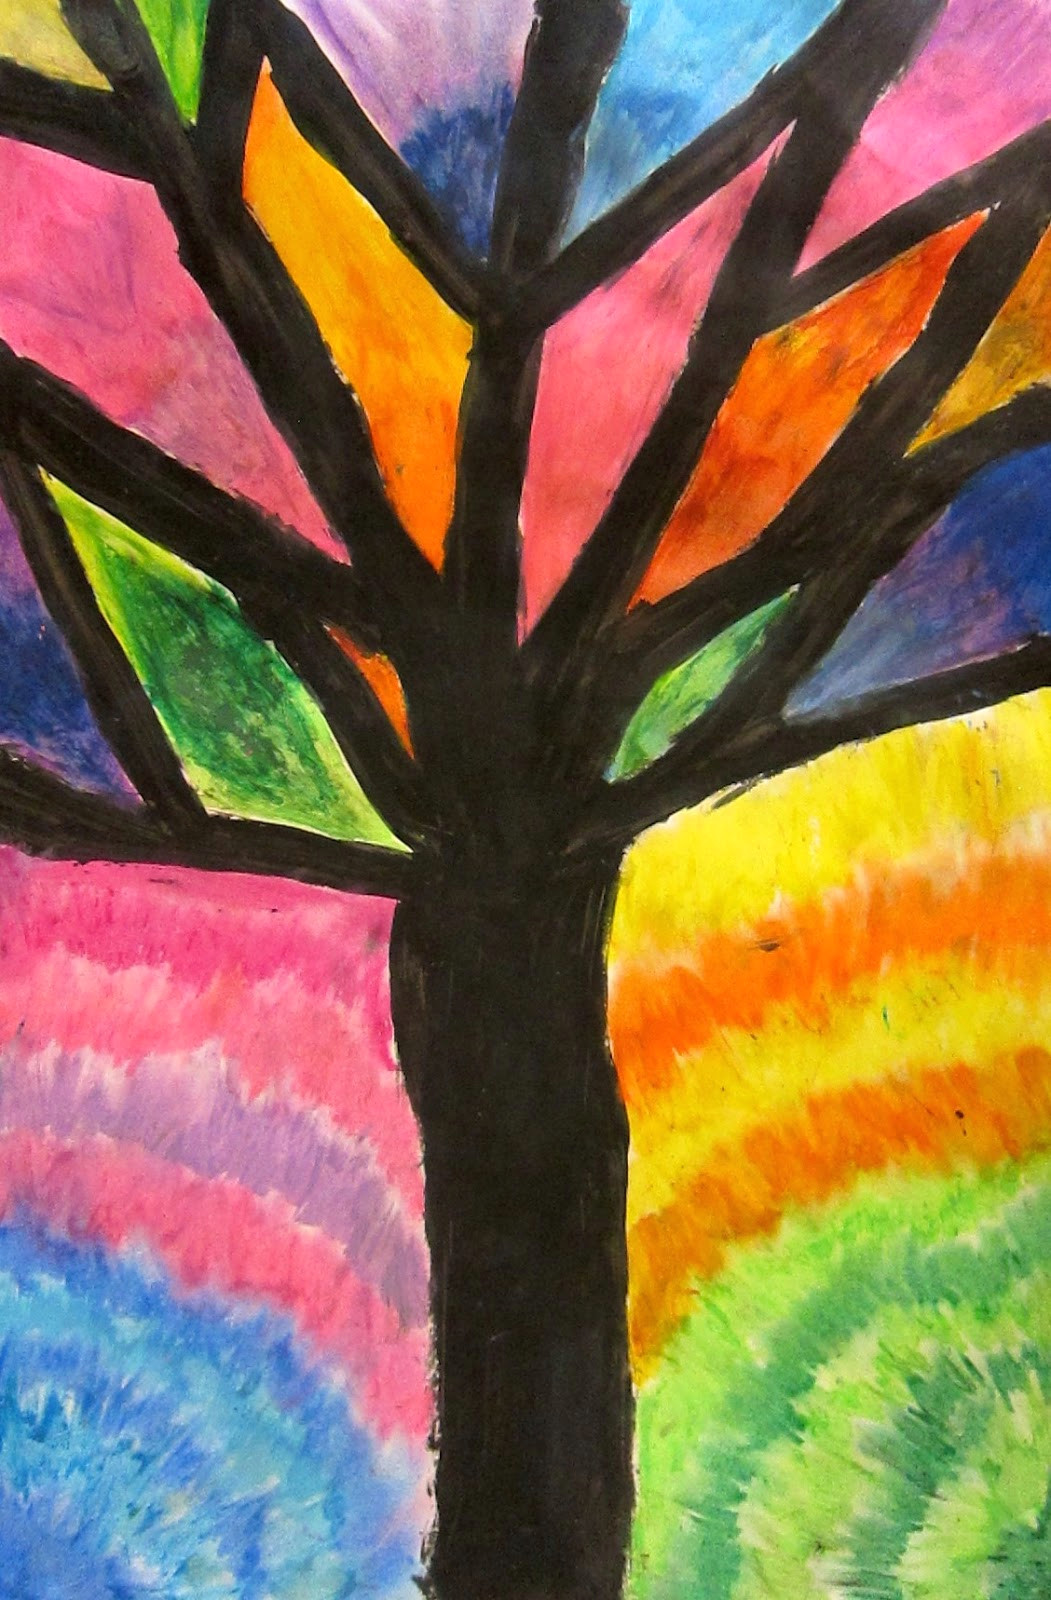 Easy Drawings by Oil Pastels Art is Basic Art Teacher Blog Abstract Oil Pastel Trees 4th 5th